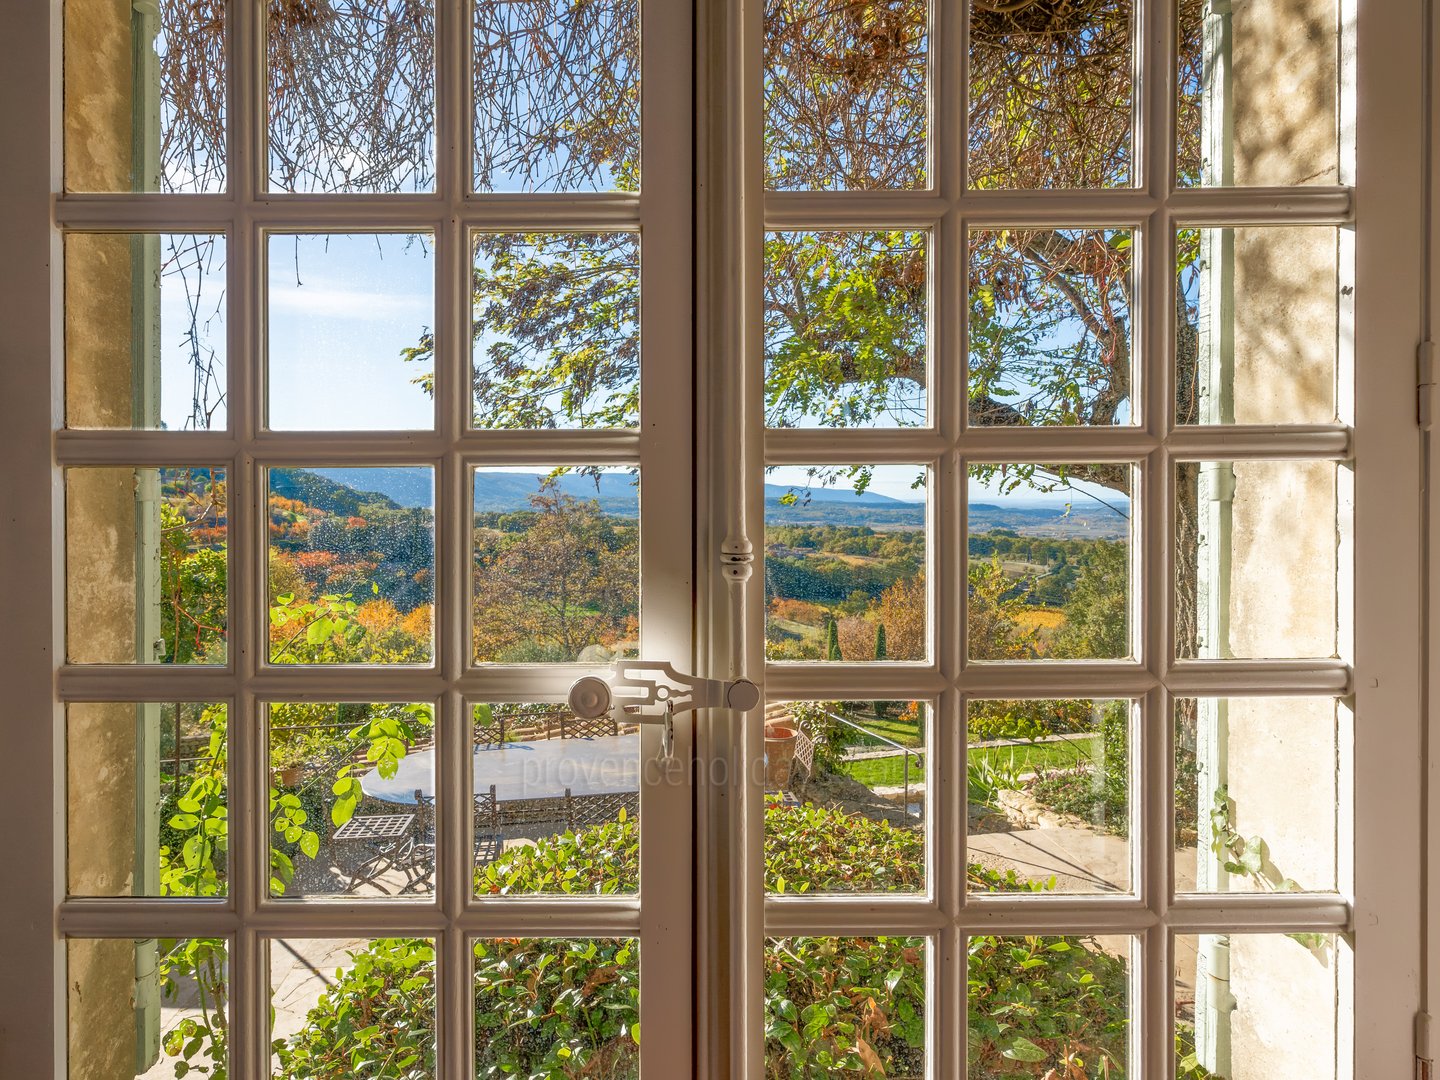 18th century Bastide with views of Luberon for sale - Bonnieux - 49